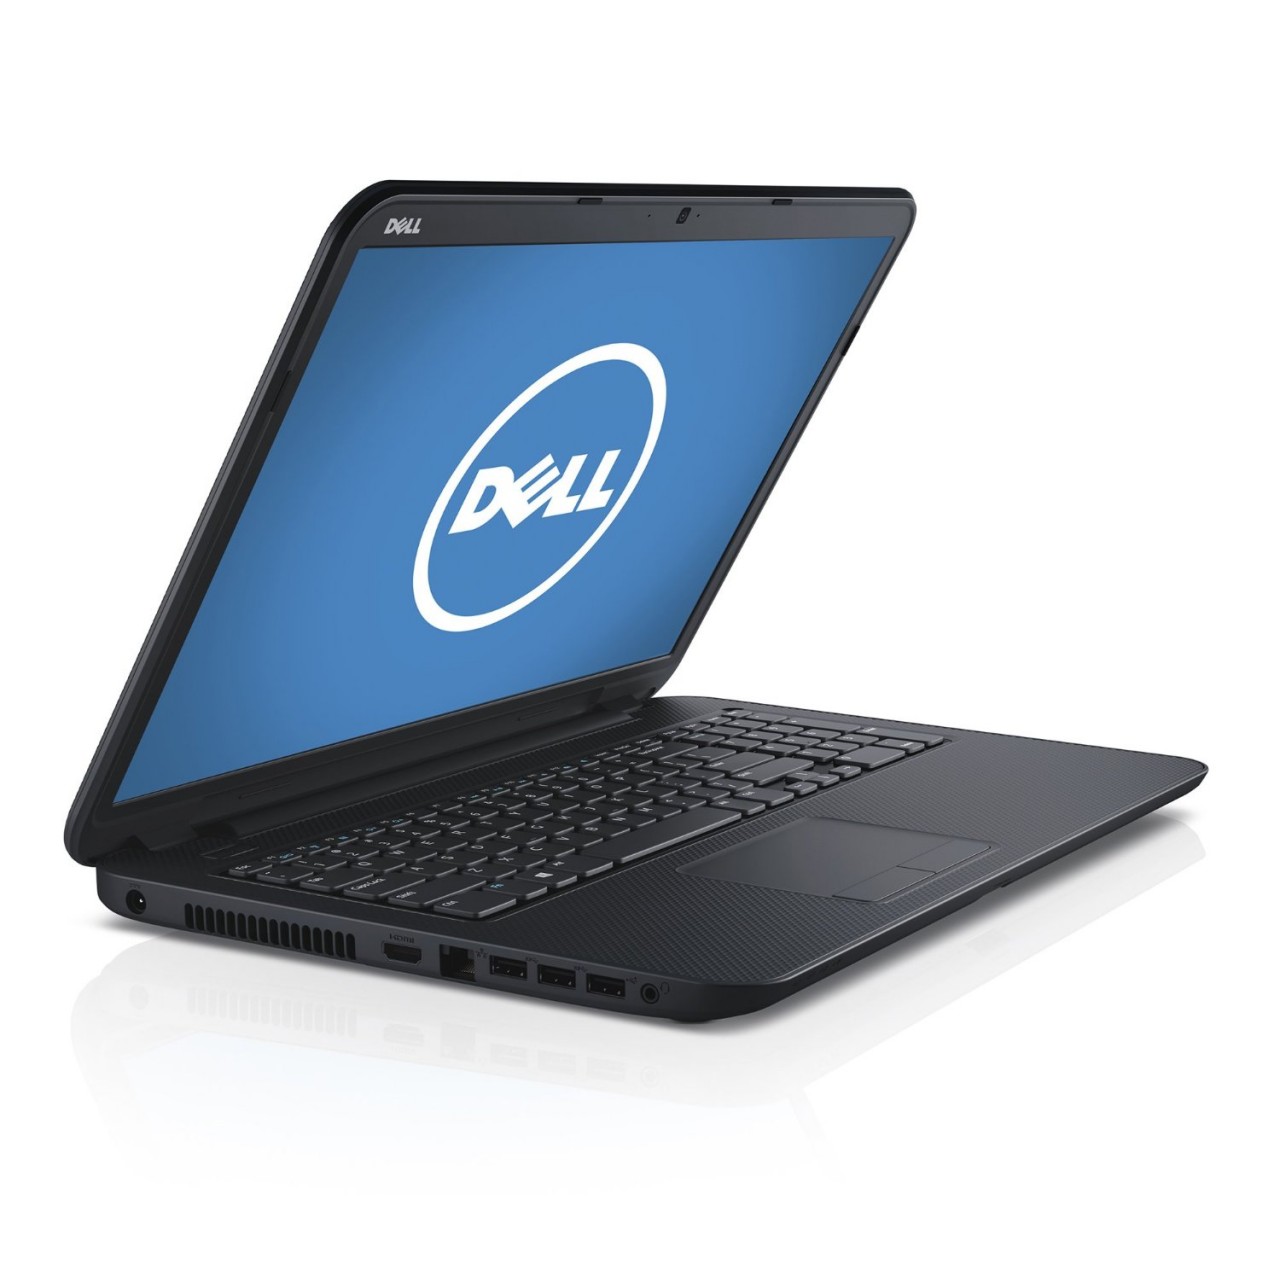 Solved: Dell Wireless 365 Bluetooth driver for windows 8